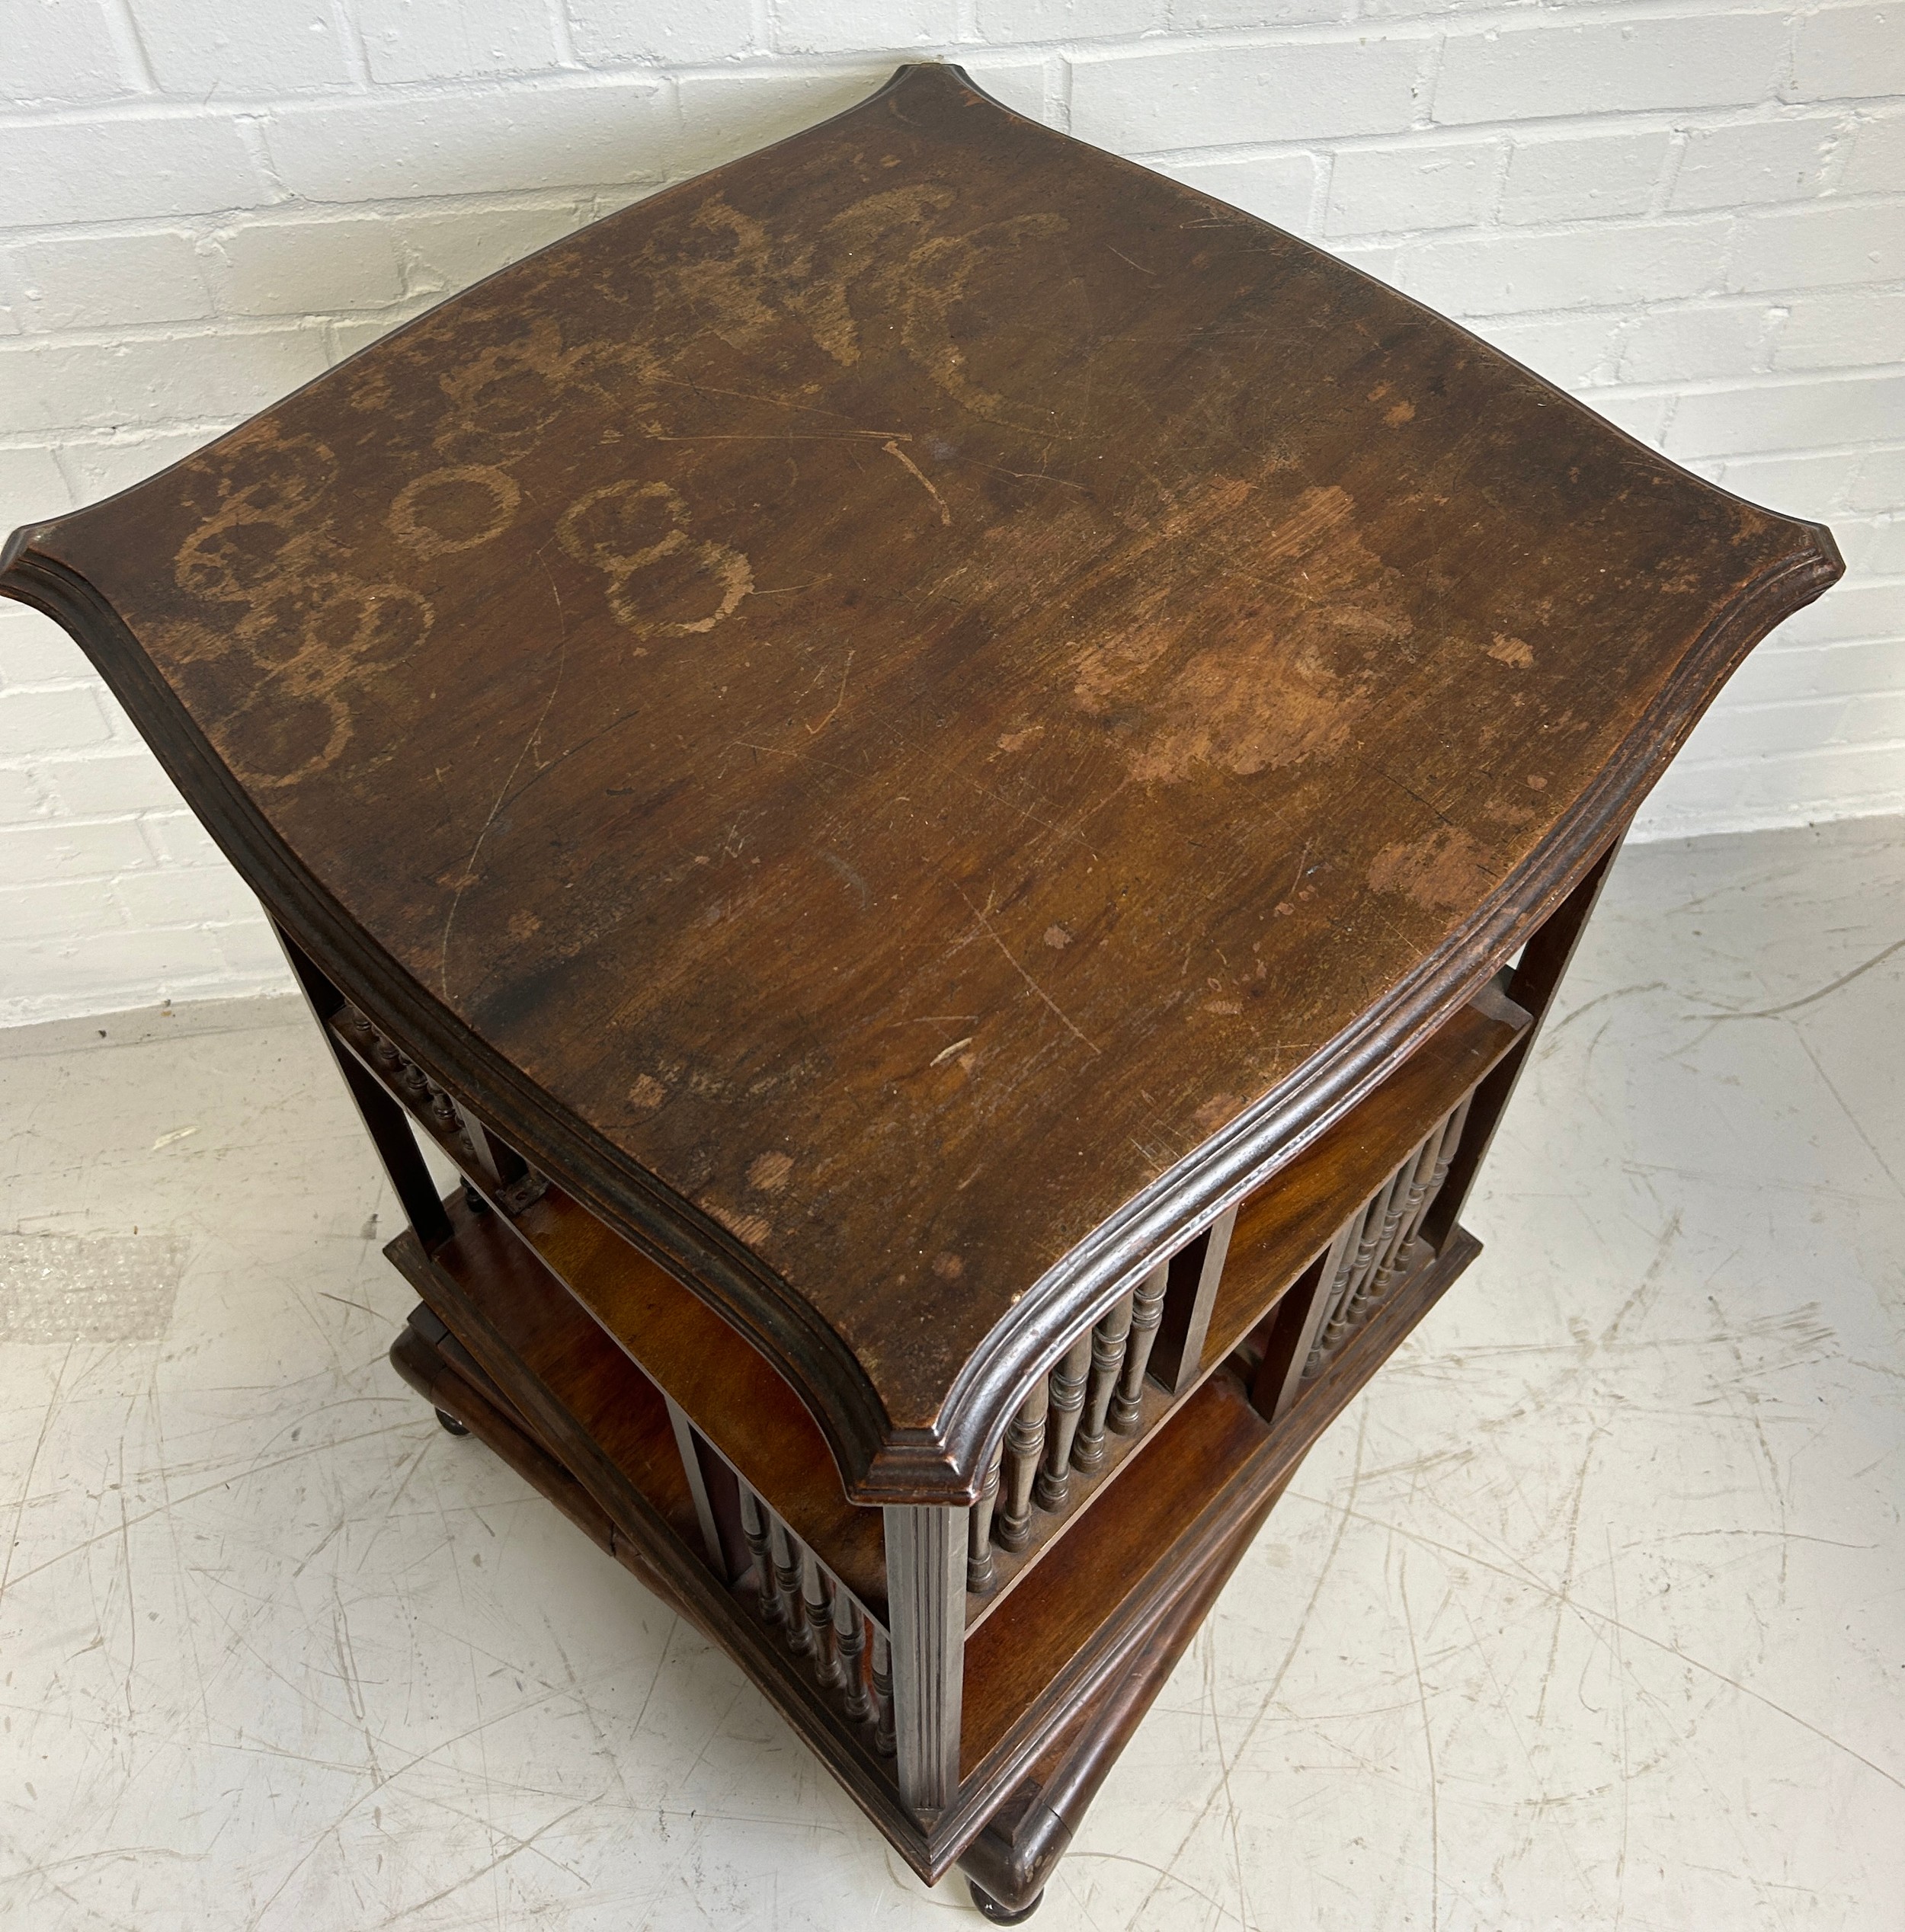 AN EDWARDIAN MAHOGANY TWO TIER REVOLVING BOOKCASE, 84cm x 60cm x 60cm - Image 3 of 4